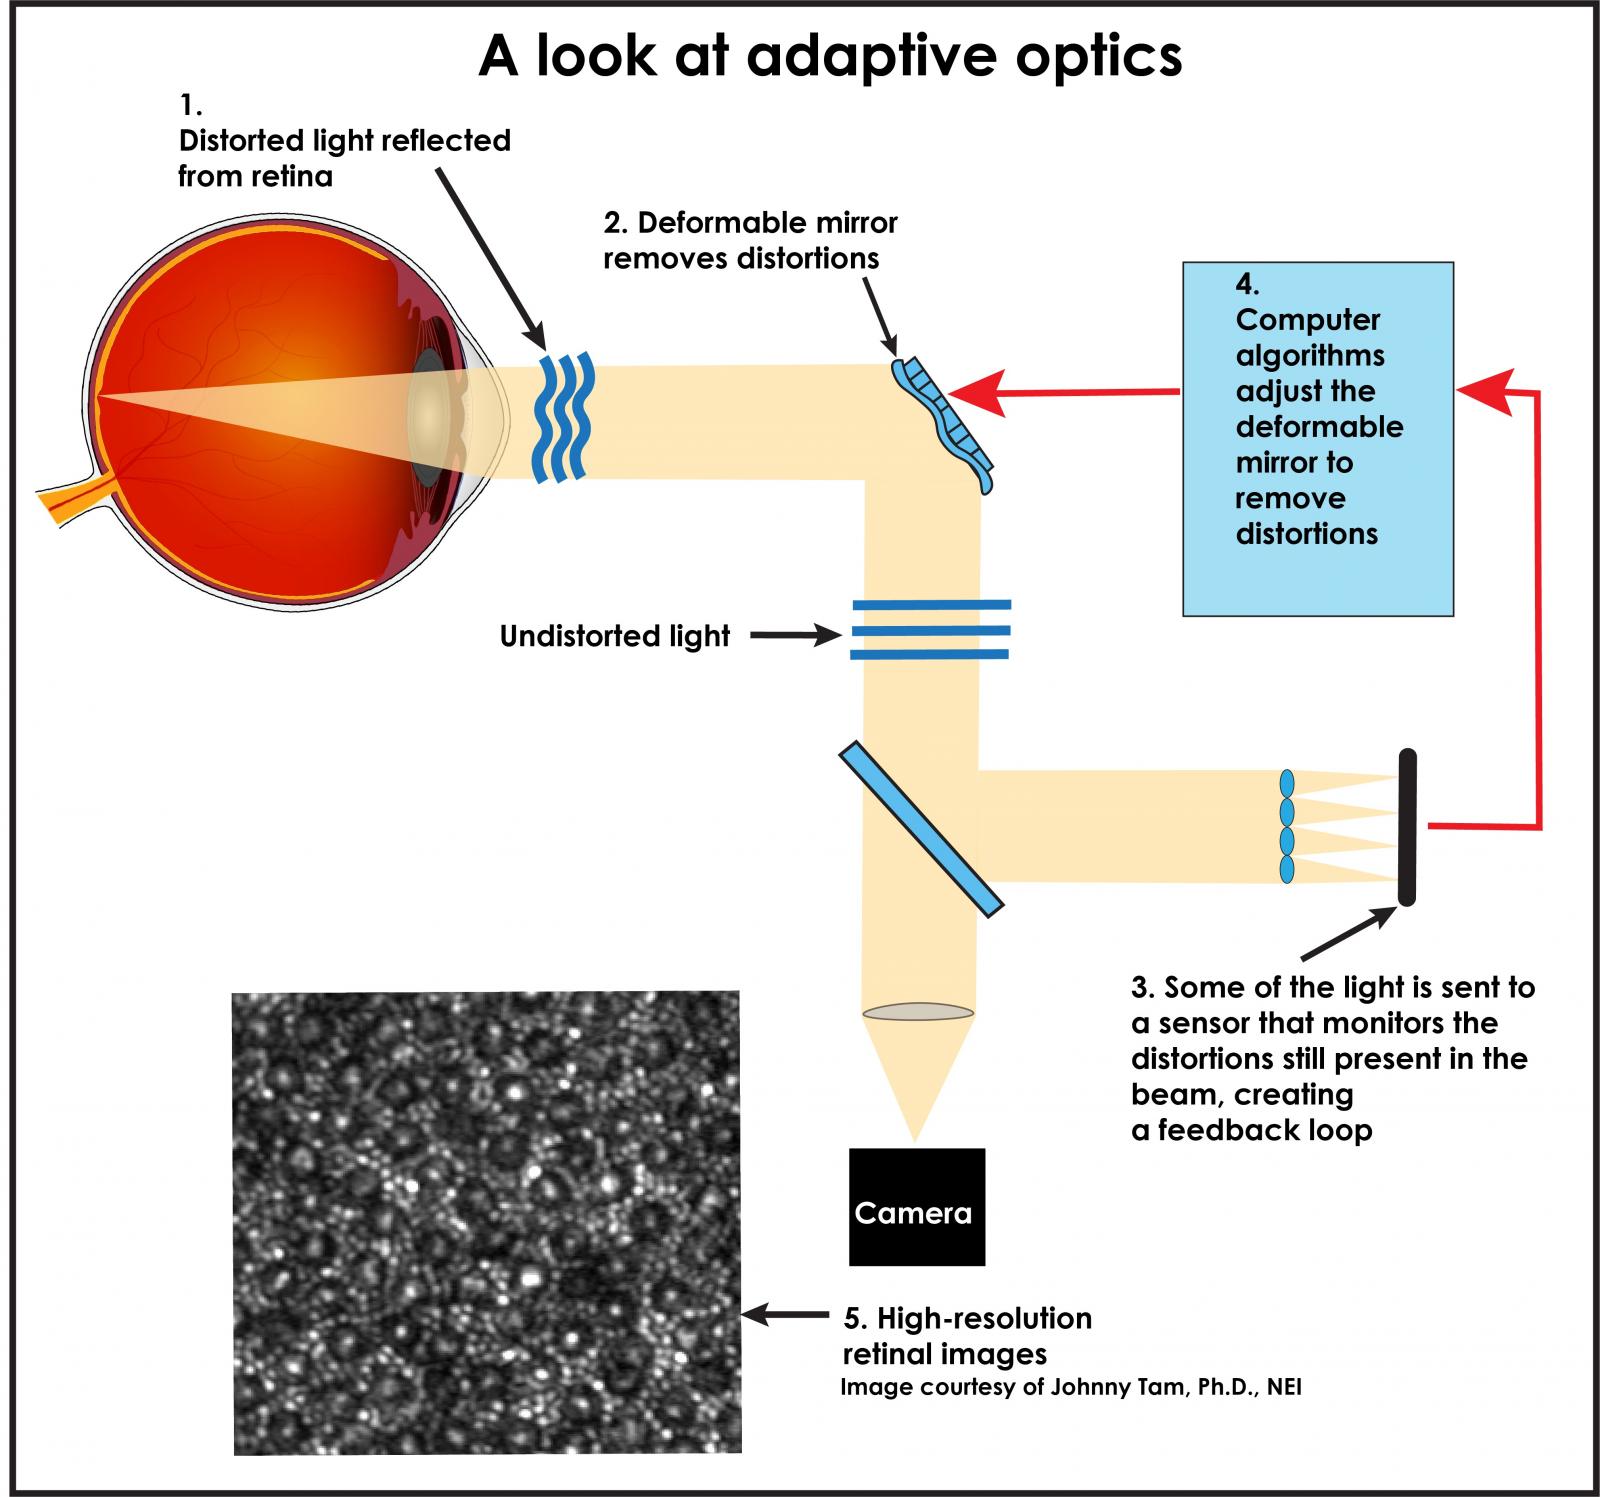 Diagram shows a look at adaptive optics: 1. distorted light is shown reflected from the retina. 2) Deformable mirror removes distortions. Light is undistorted. 3. Some of the light is sent to a sensor that monitors the distortions still present in the beam, creating a feedback loop. 4. Computer algorithms adjust the deformable mirror to remove distortions. 5. the undistorted light is captured by a camera, which produces a high resolution retinal image. photo shows black and white images of photoreceptors.